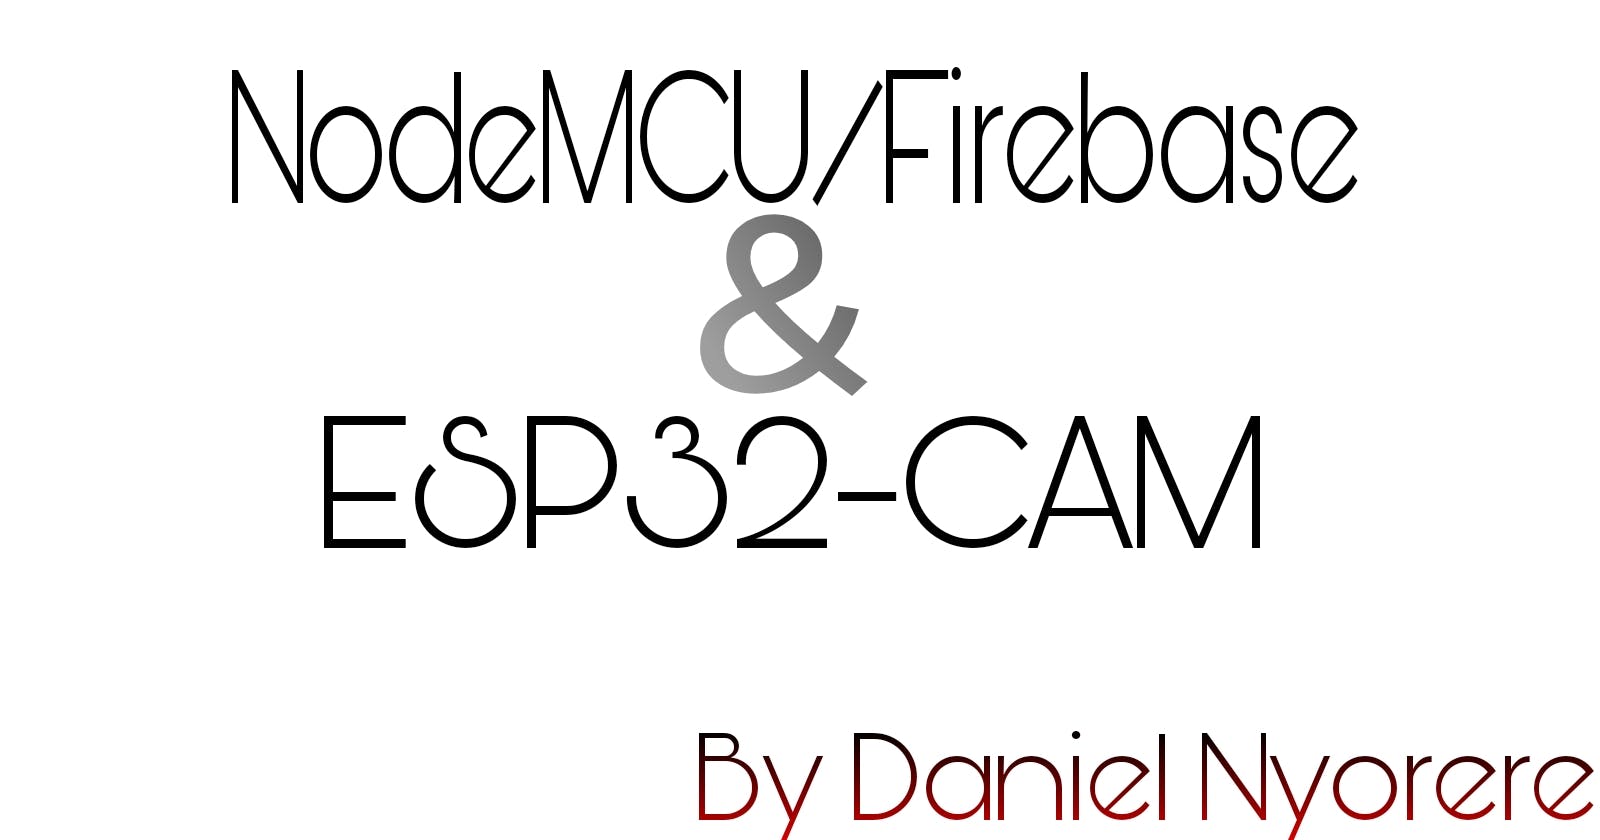 Solving issues encountered during usage of NodeMCU/Firebase & ESP32-CAM